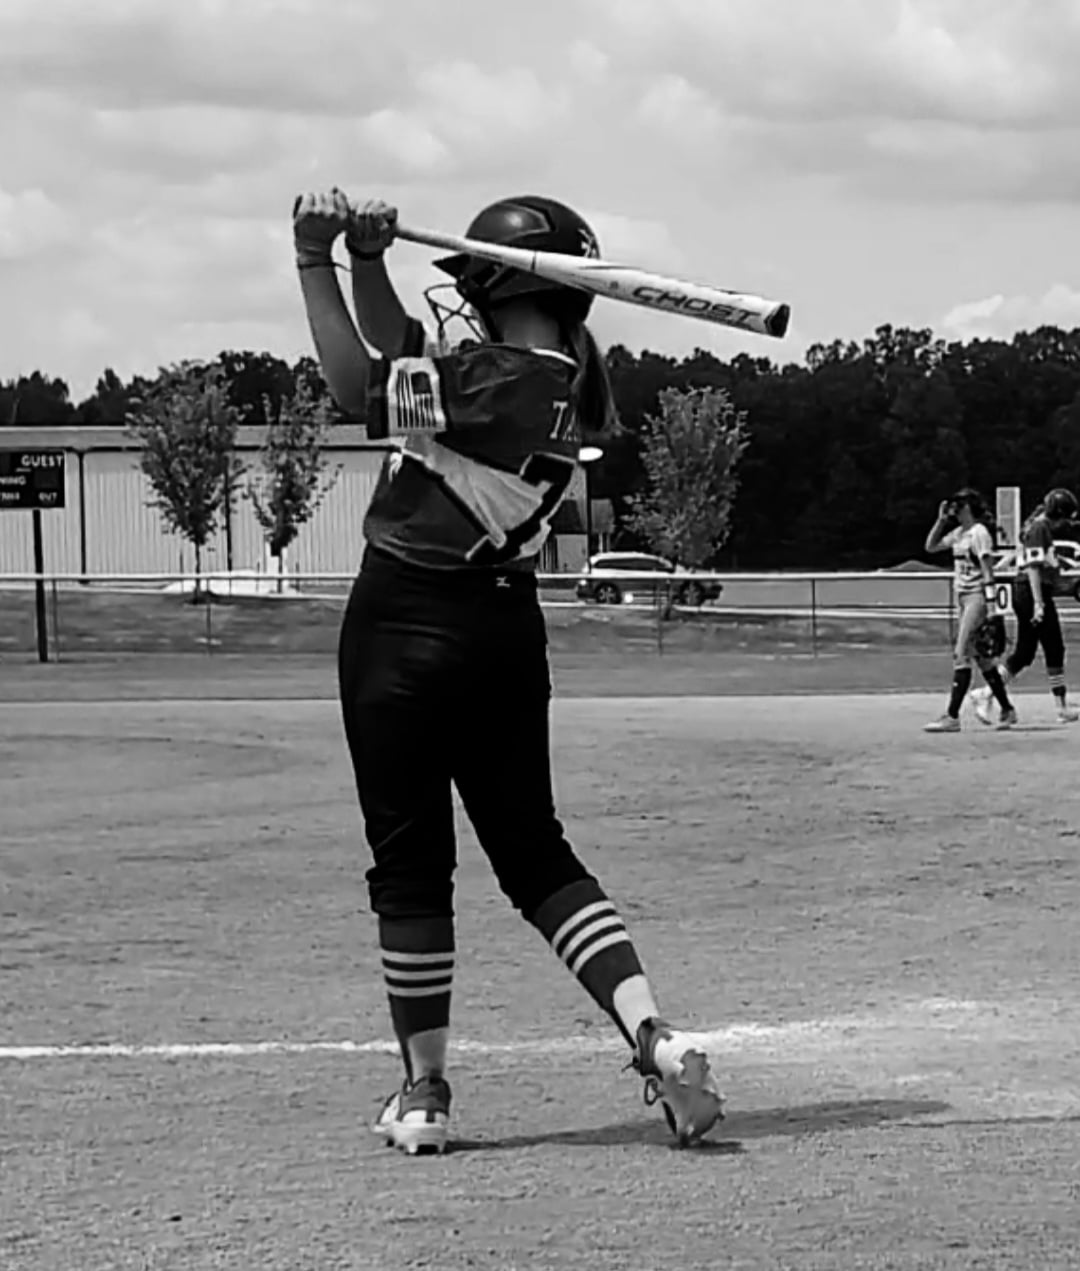 Best Fastpitch Softball Bats for 12U Fastpitch Softball Players in 2023